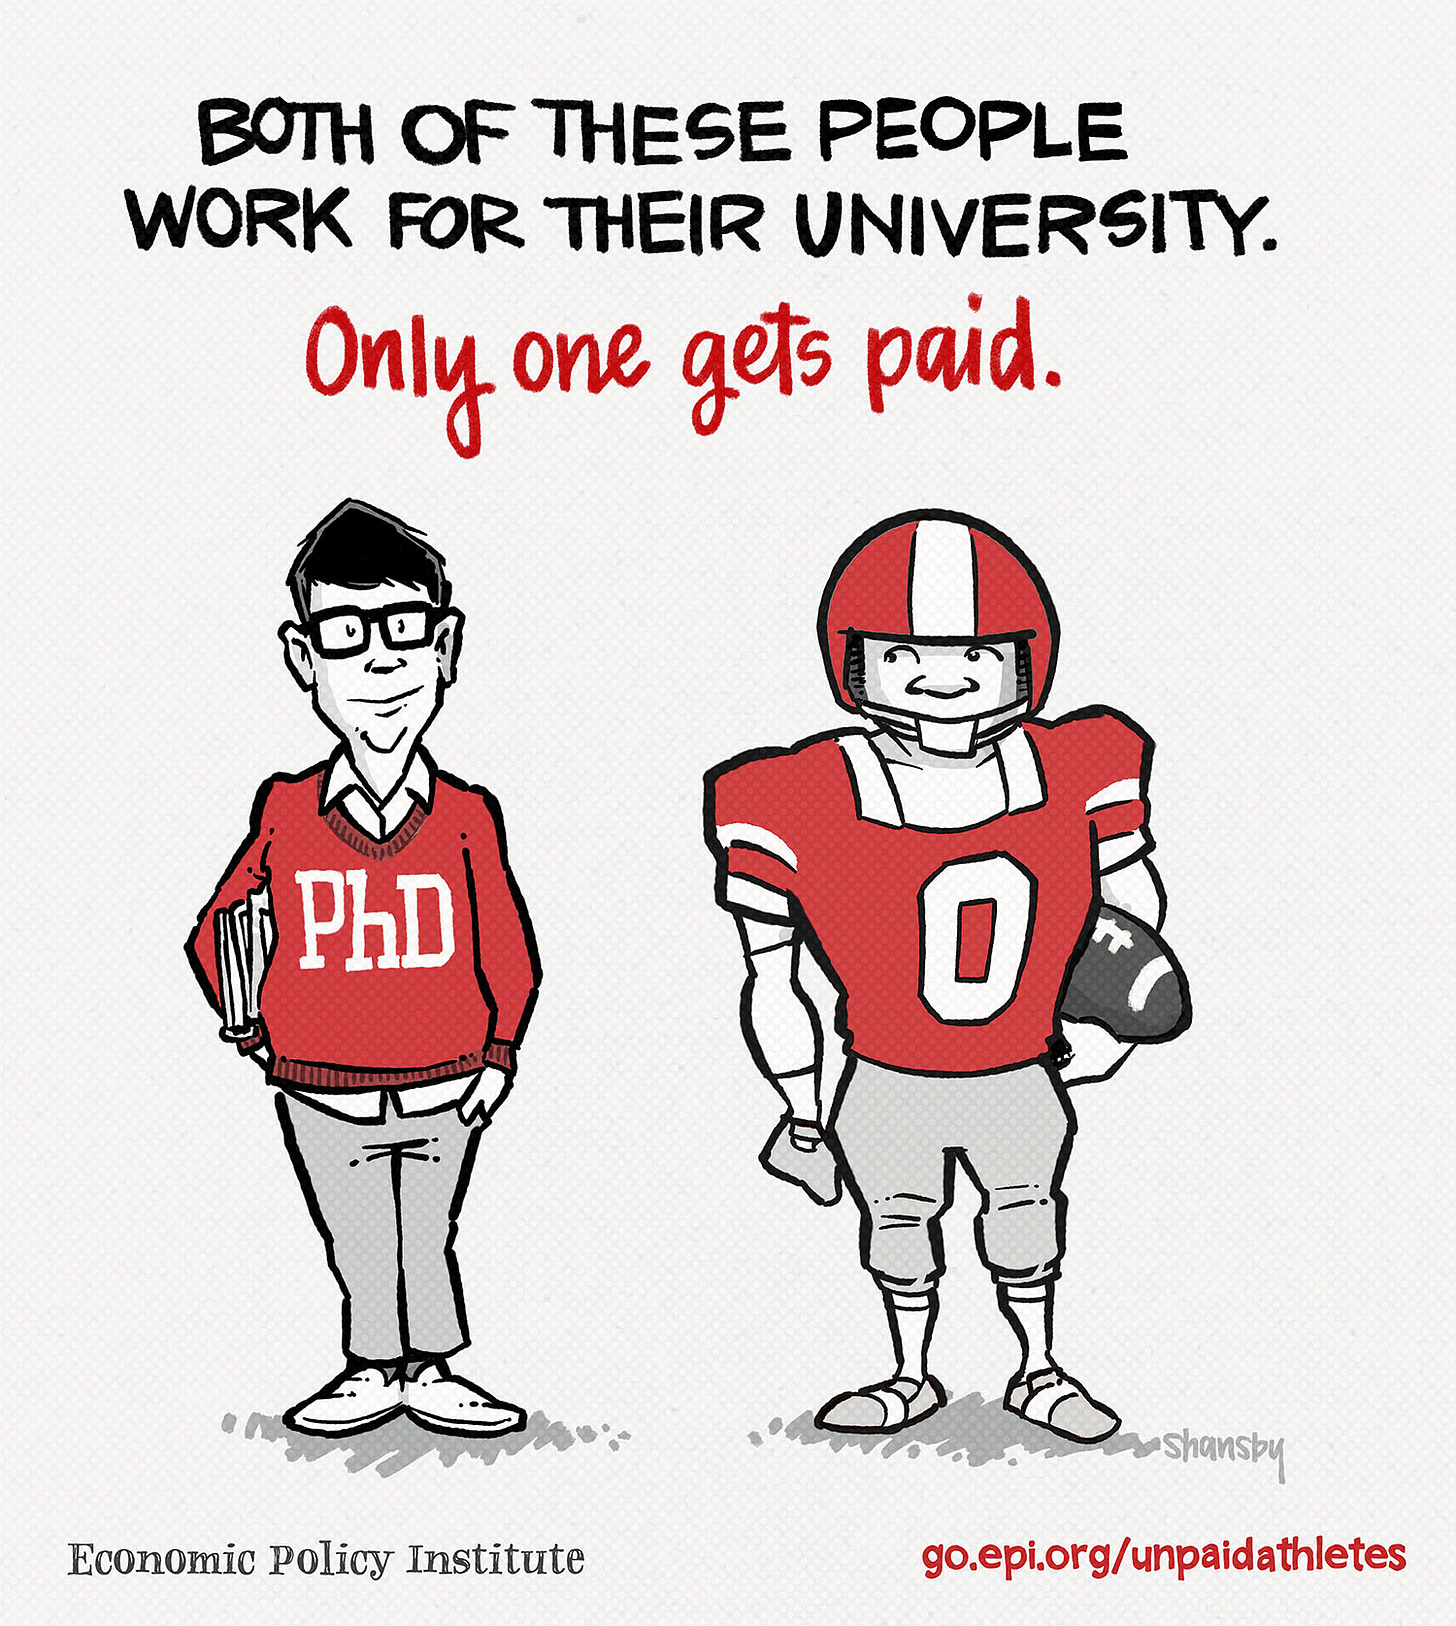 College athletes and Ph.D. students both work for the university, but only  one earns a salary | Economic Policy Institute